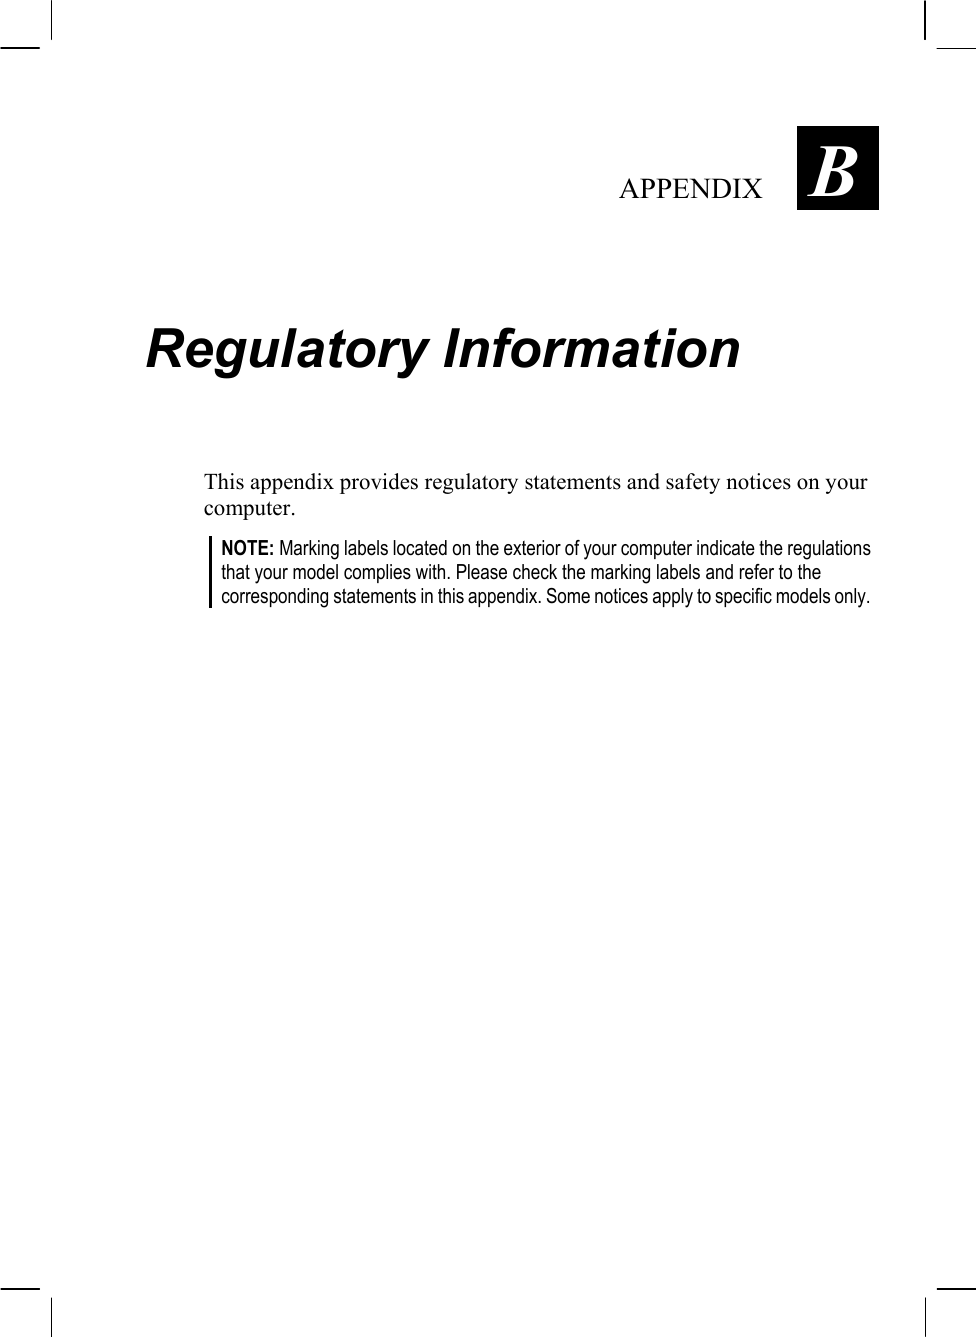   APPENDIX  B Regulatory Information This appendix provides regulatory statements and safety notices on your computer. NOTE: Marking labels located on the exterior of your computer indicate the regulations that your model complies with. Please check the marking labels and refer to the corresponding statements in this appendix. Some notices apply to specific models only.  